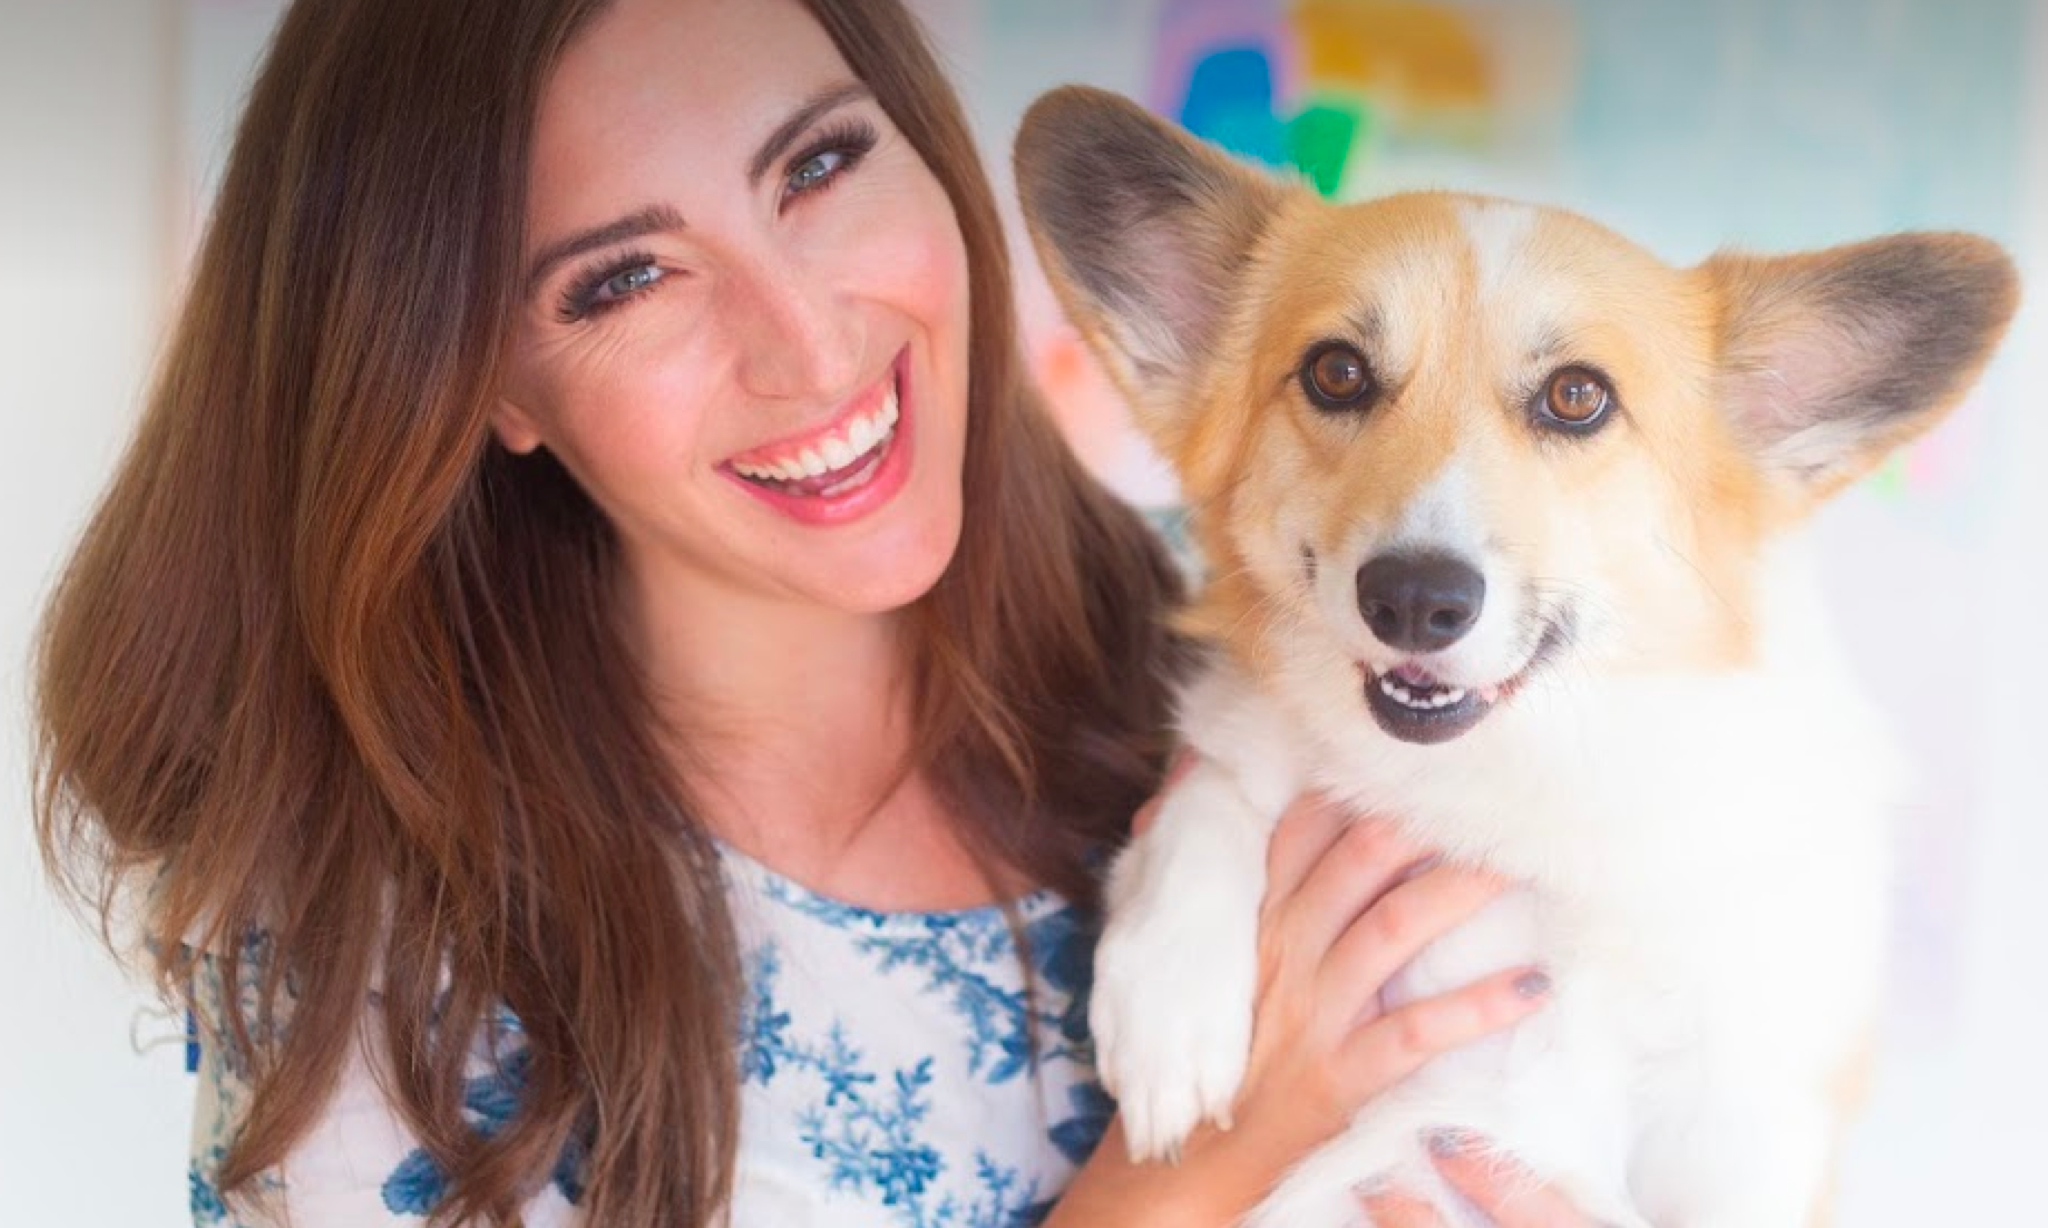 A young woman poses with her corgi